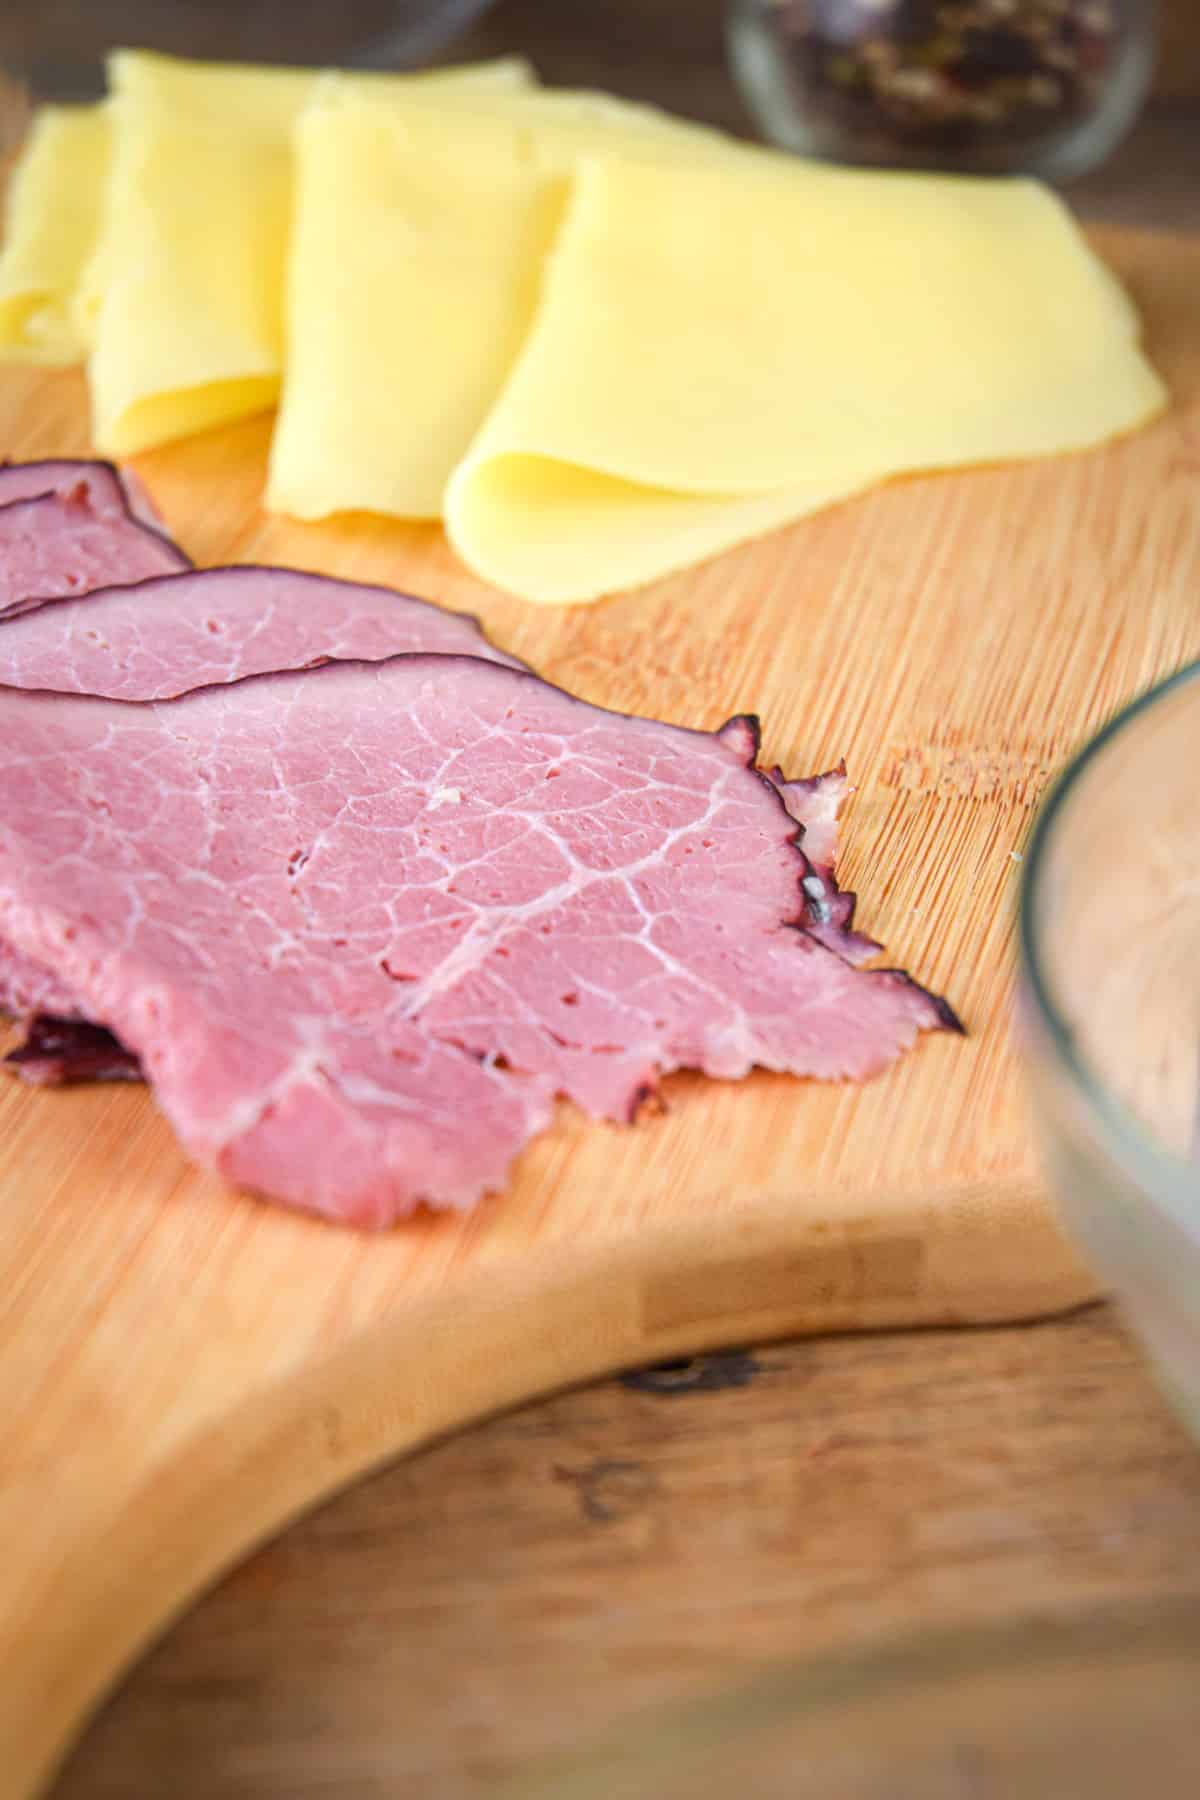 Swiss cheese and corned beef on cutting board.